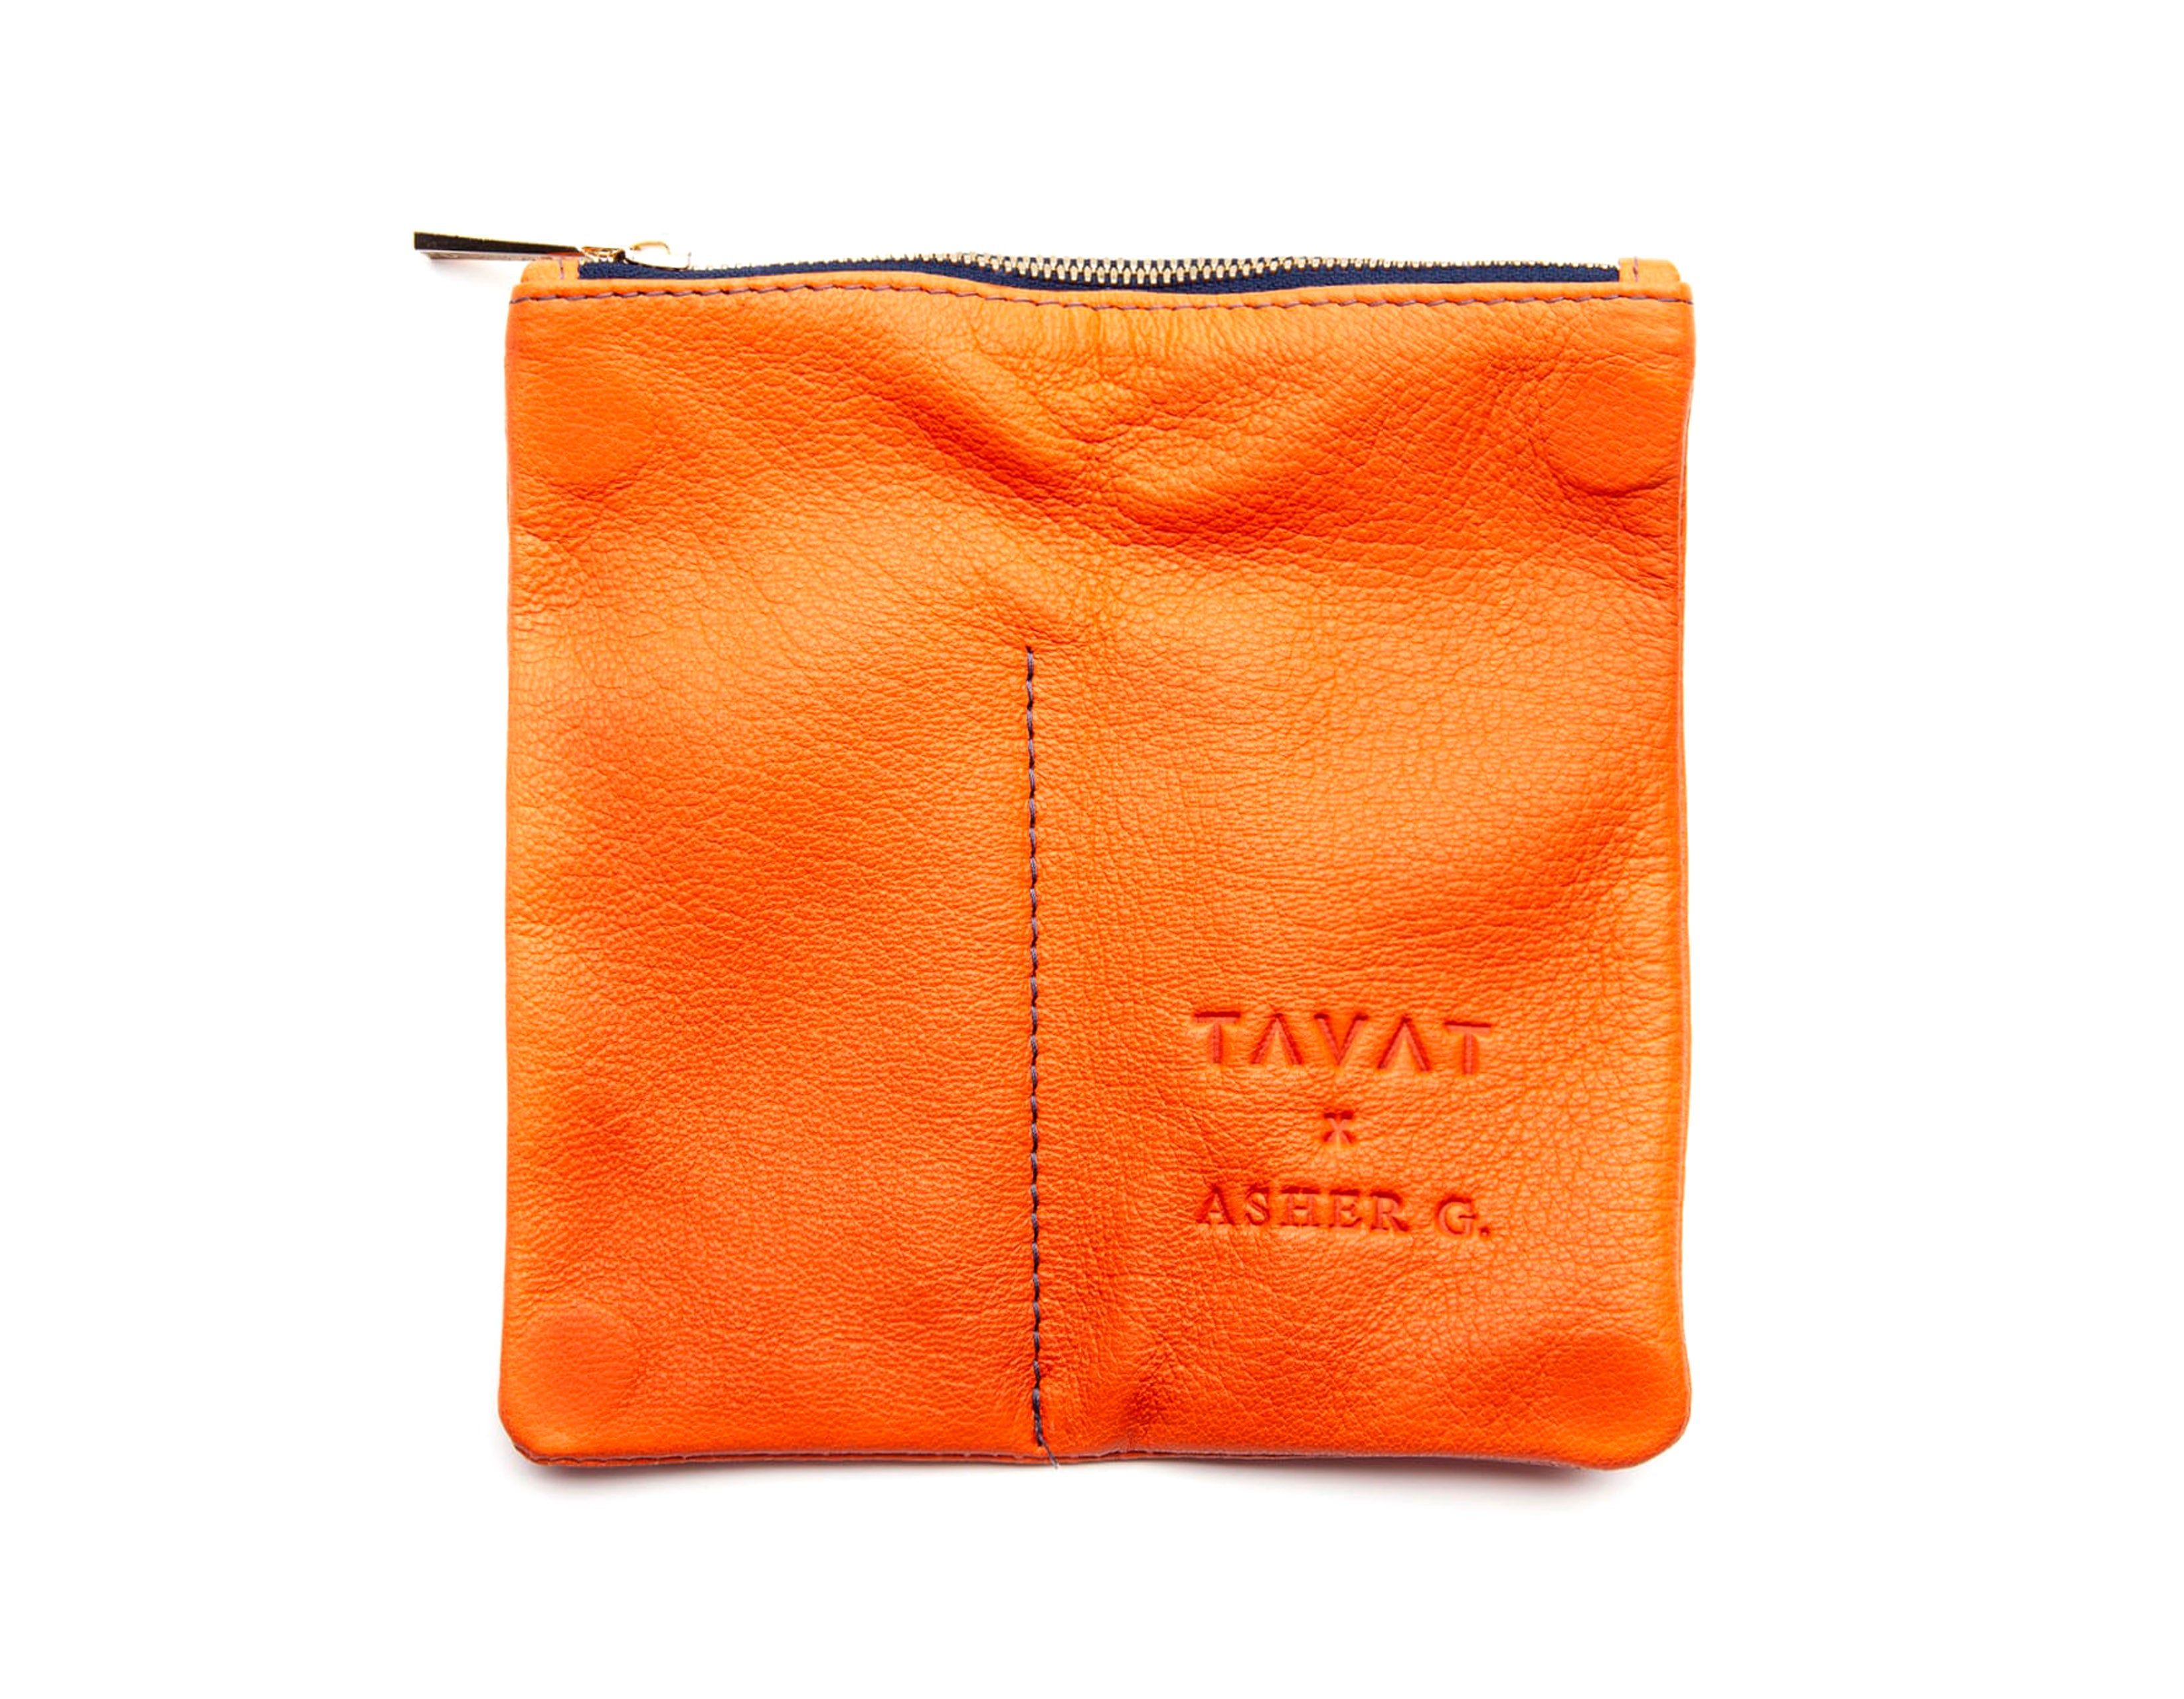 TAVAT x Asher G. Soft Pouch Leather -ORG(純手工製皮革眼鏡套)【Pre-order Now】